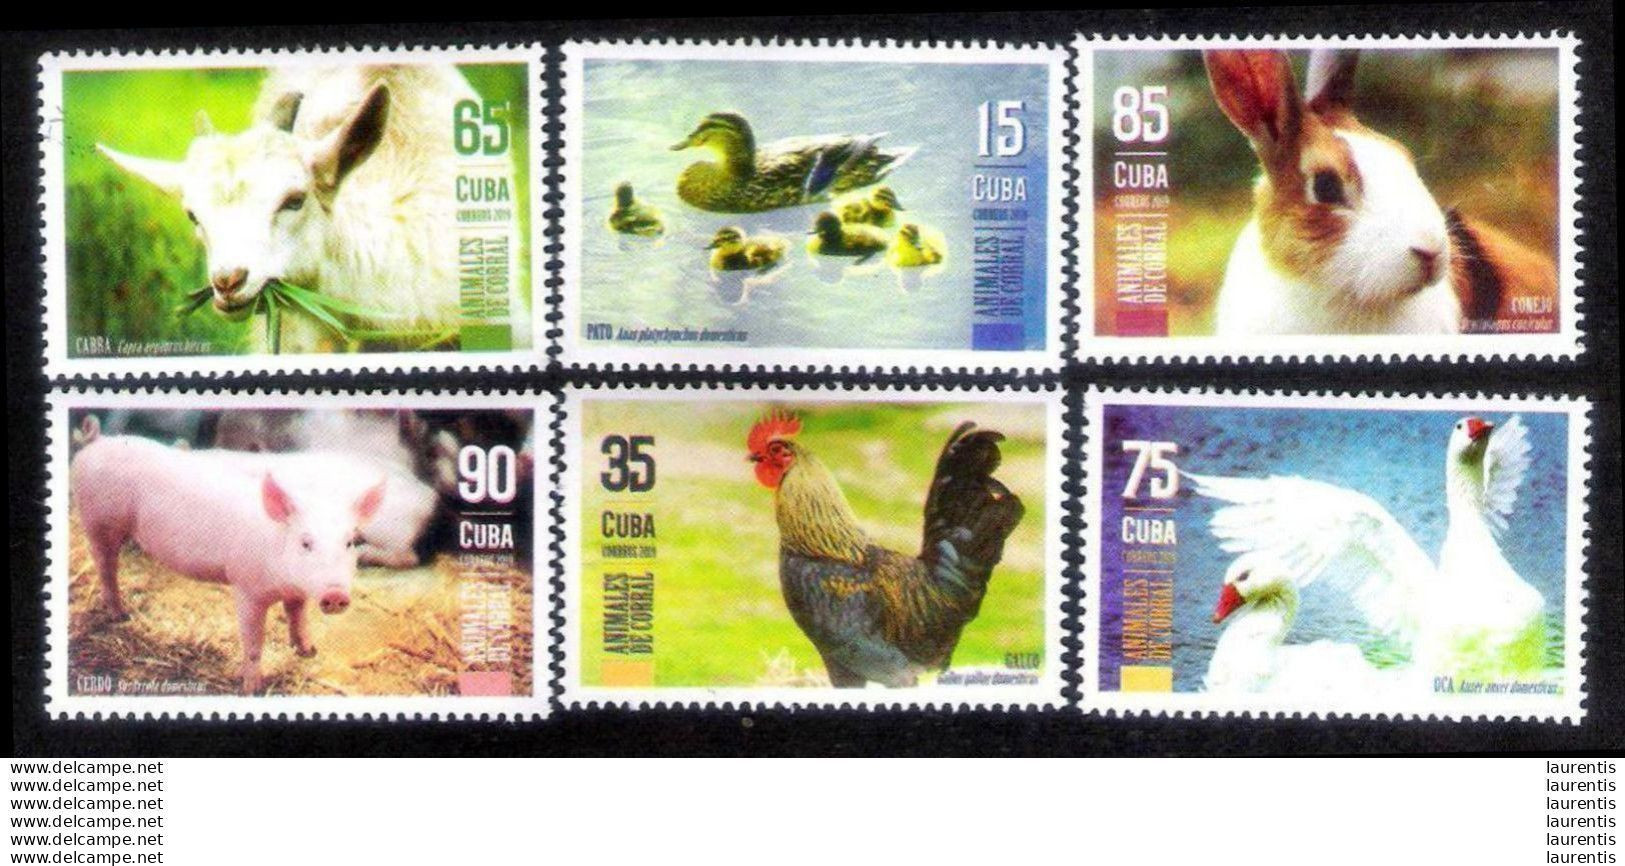 D2859  Ducks-Pigs-Roosters-Rabbits-Geese-Goats-Cows - 2019 - MNH - Cb - 2,25 - Ferme